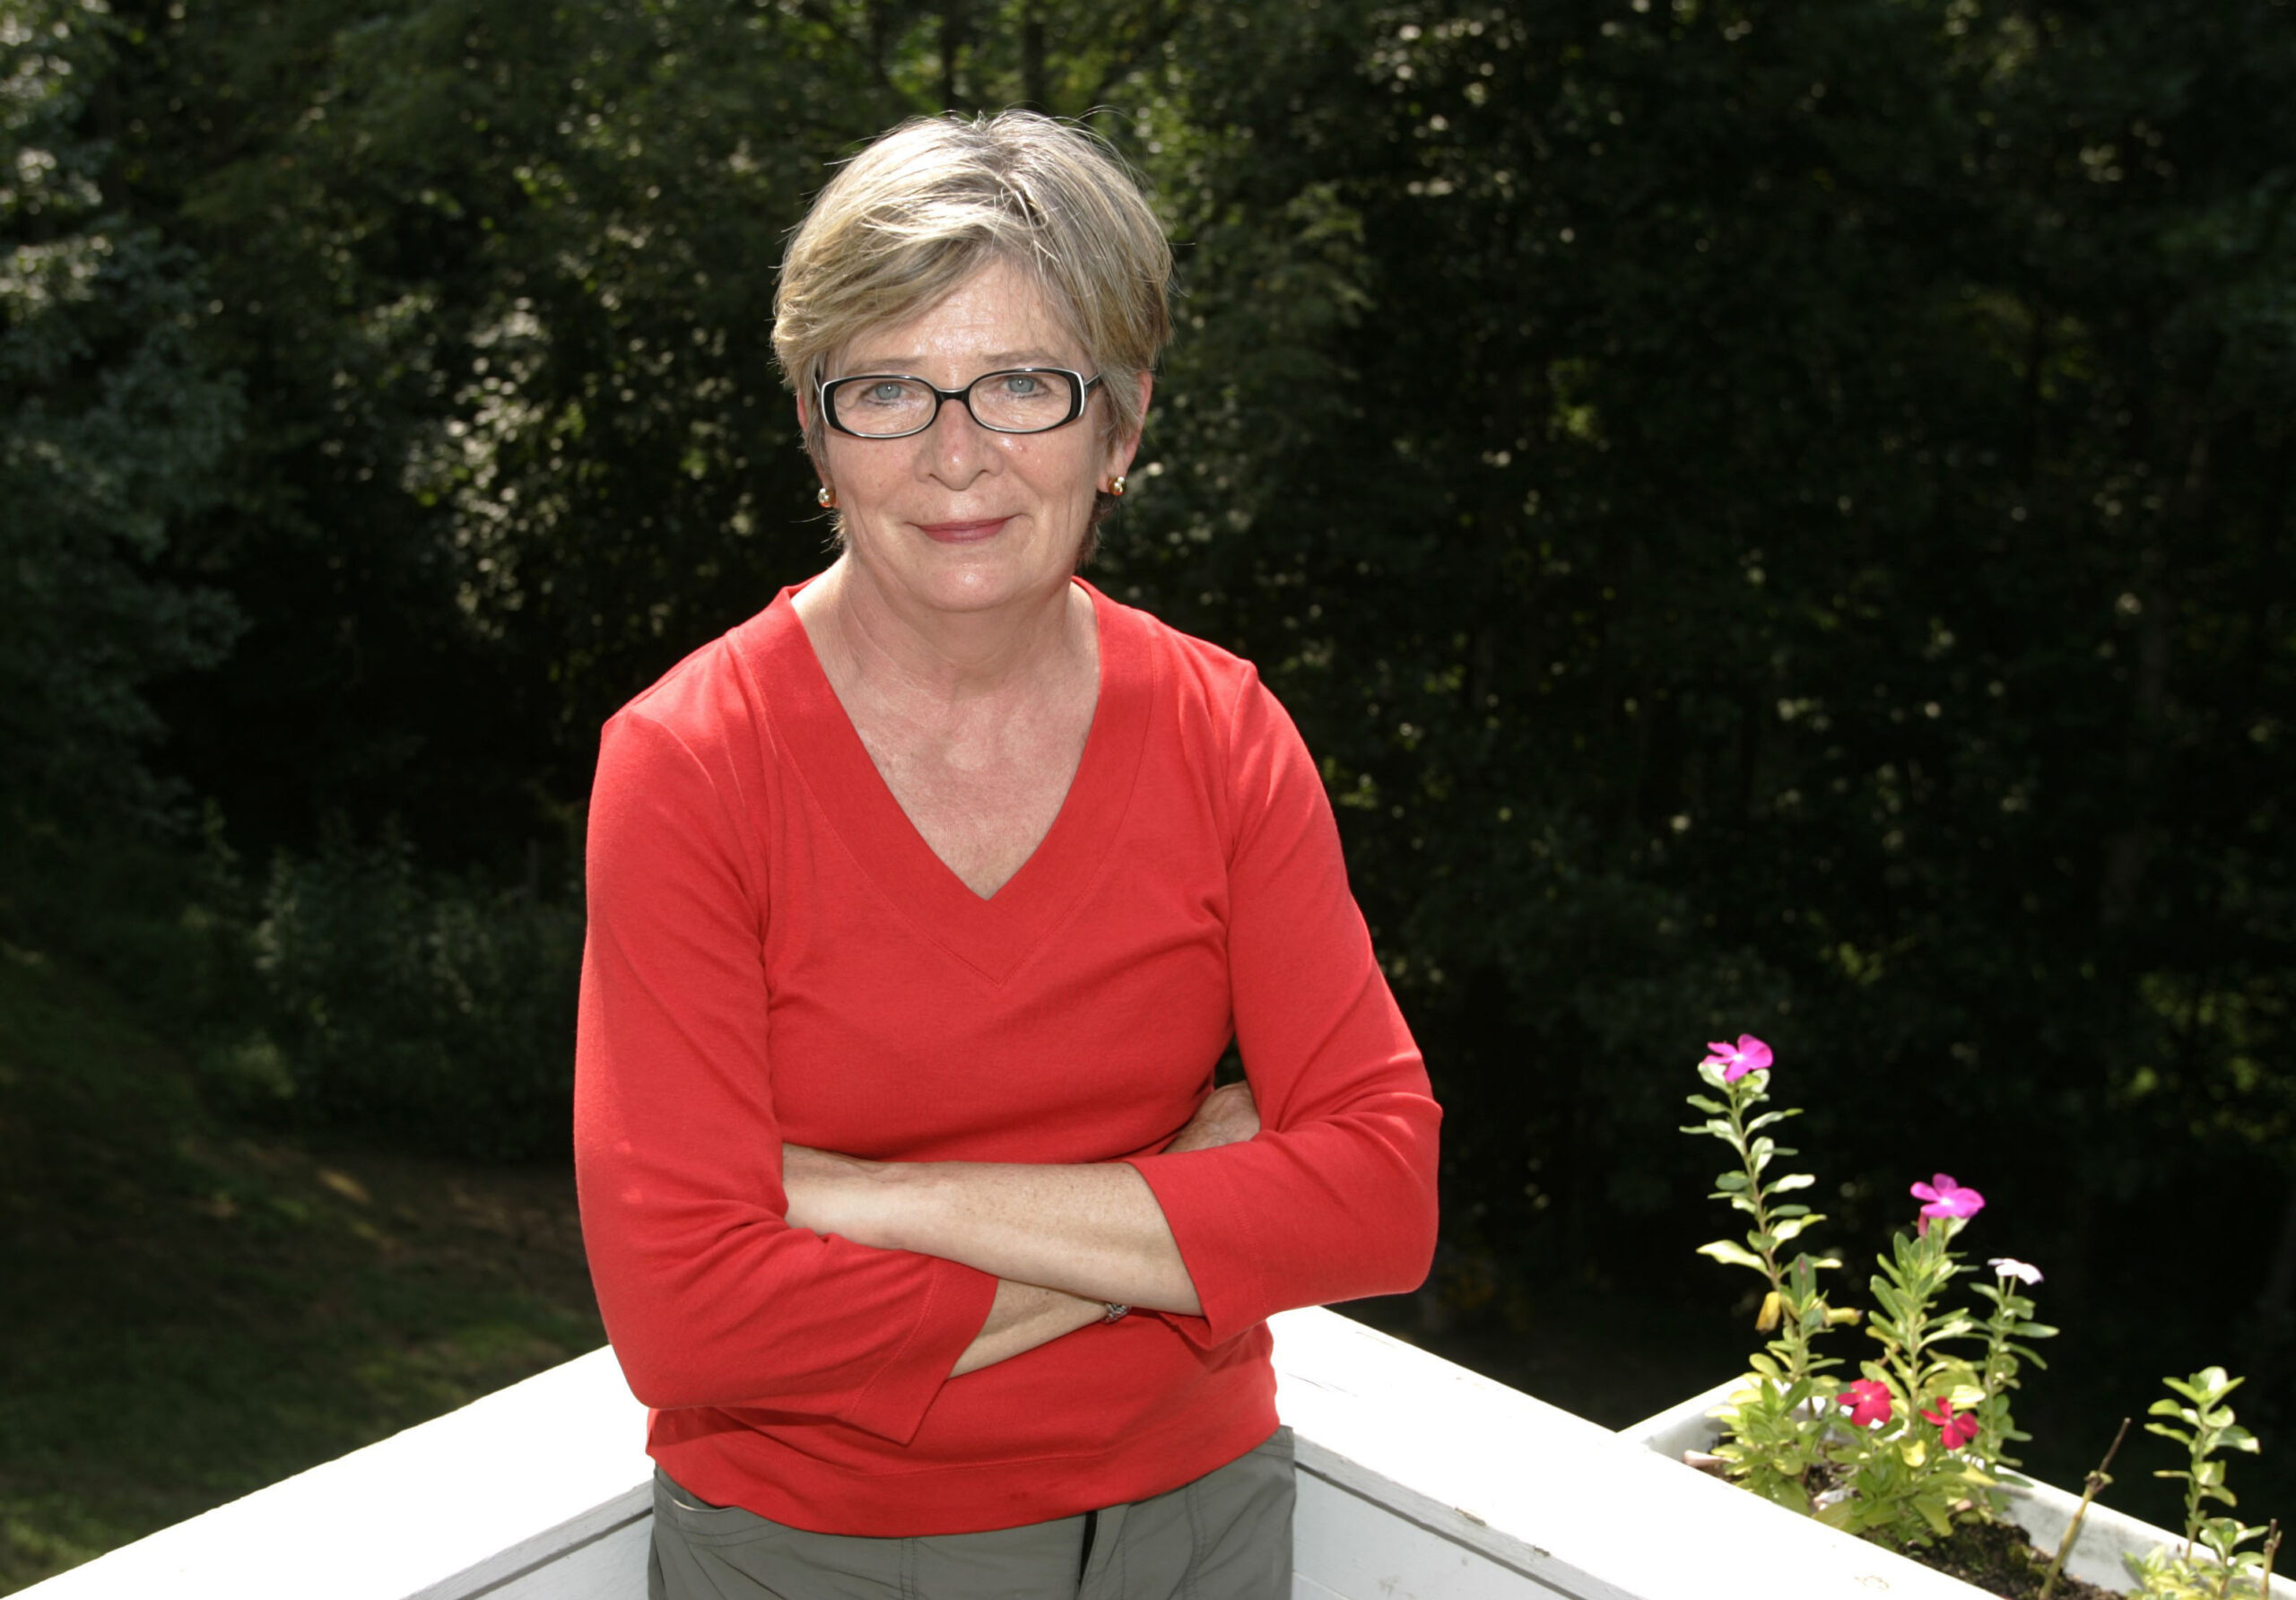 FILE - Author Barbara Ehrenreich poses at her home in Charlottesville, Va., on Aug. 25, 2005. Ehrenreich, the muckraking author, activist and journalist who in such notable works as “Nickel and Dimed” and “Bait and Switch" challenged conventional thinking about class, religion and the very idea of an American dream, died Thursday morning, Sept. 1, 2022 in Alexandria, Virginia, according to her son. She was 81. (AP Photo/Andrew Shurtleff, File)